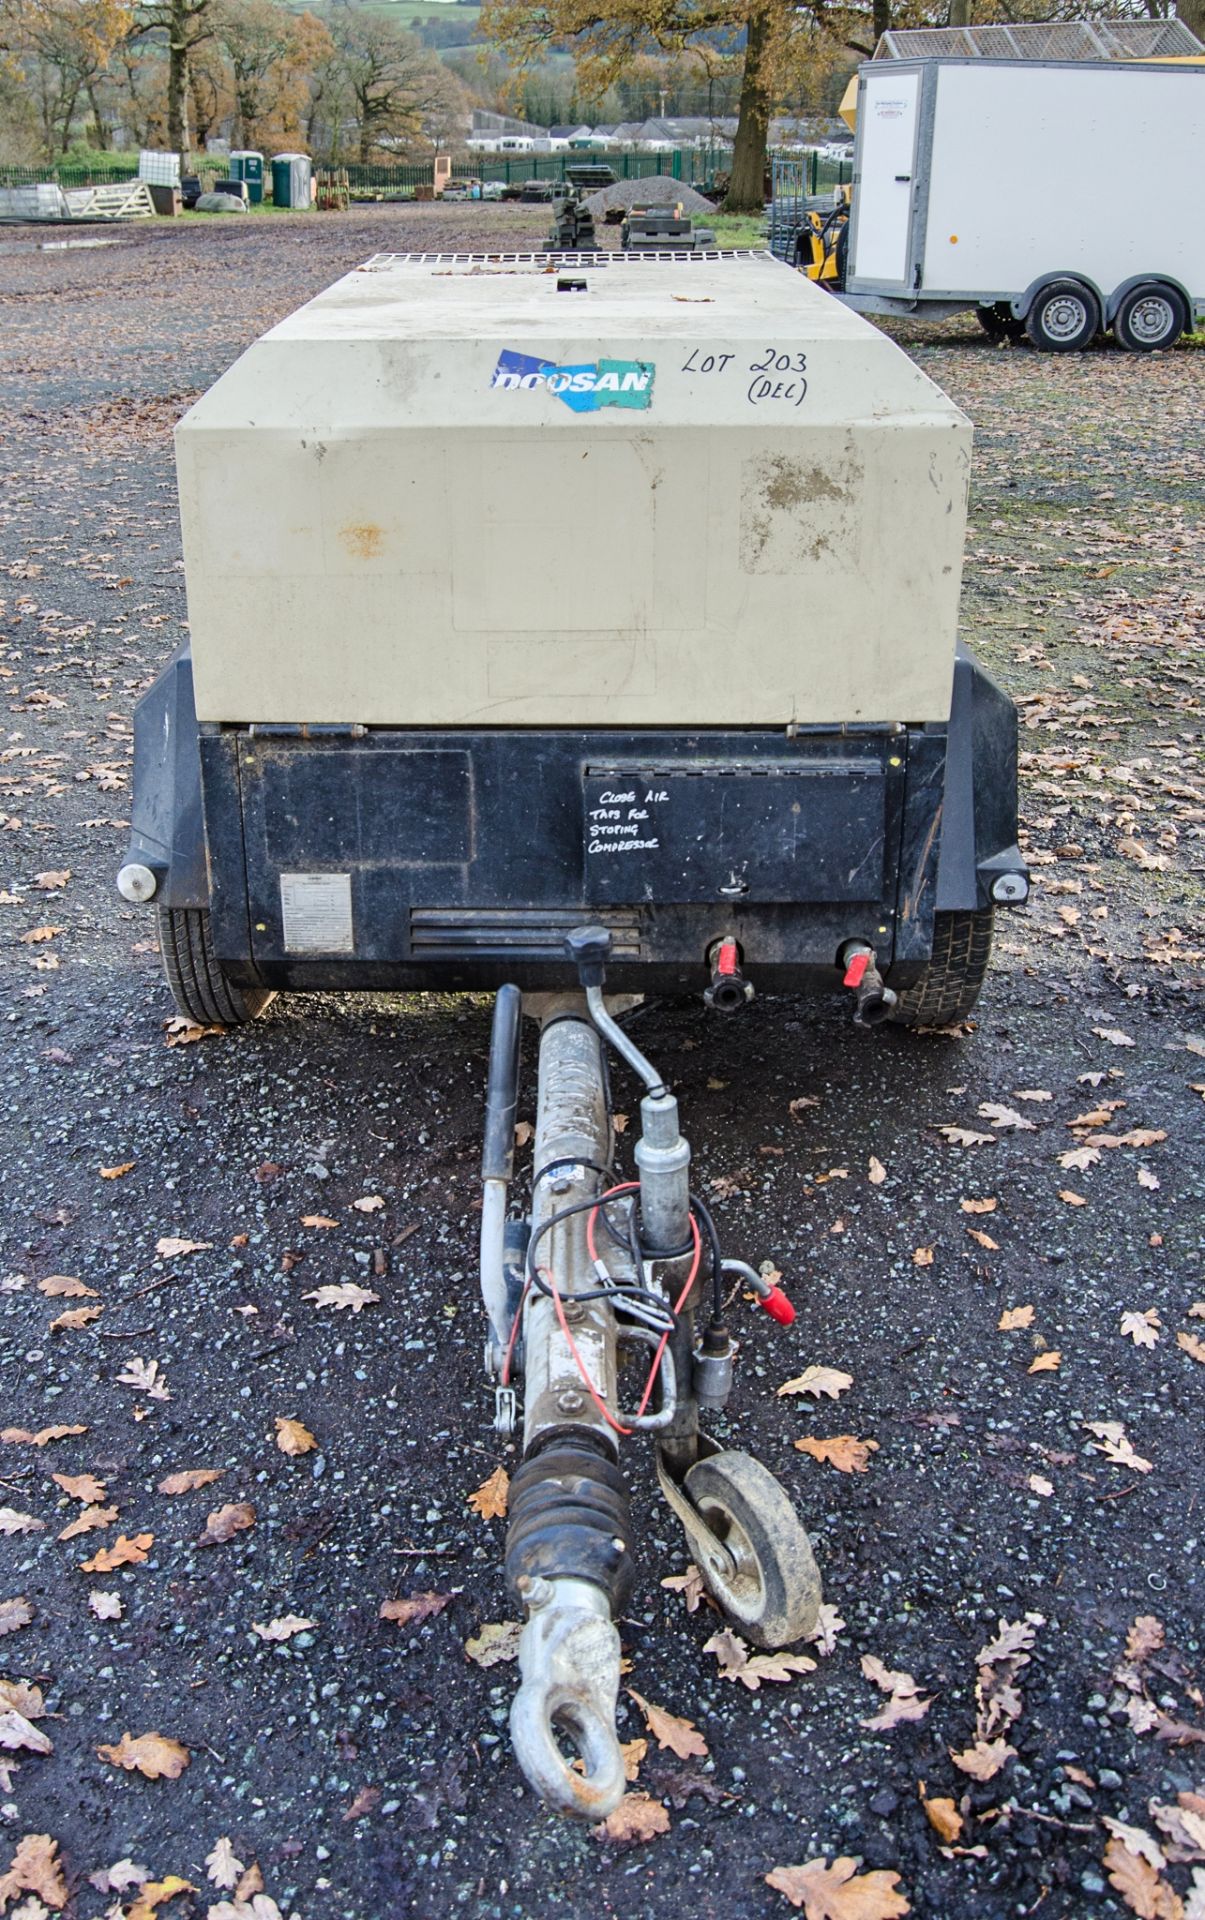 Doosan 7/41 diesel driven fast tow mobile air compressor Year: 2015 S/N: 433791 Recorded Hours: - Image 5 of 11